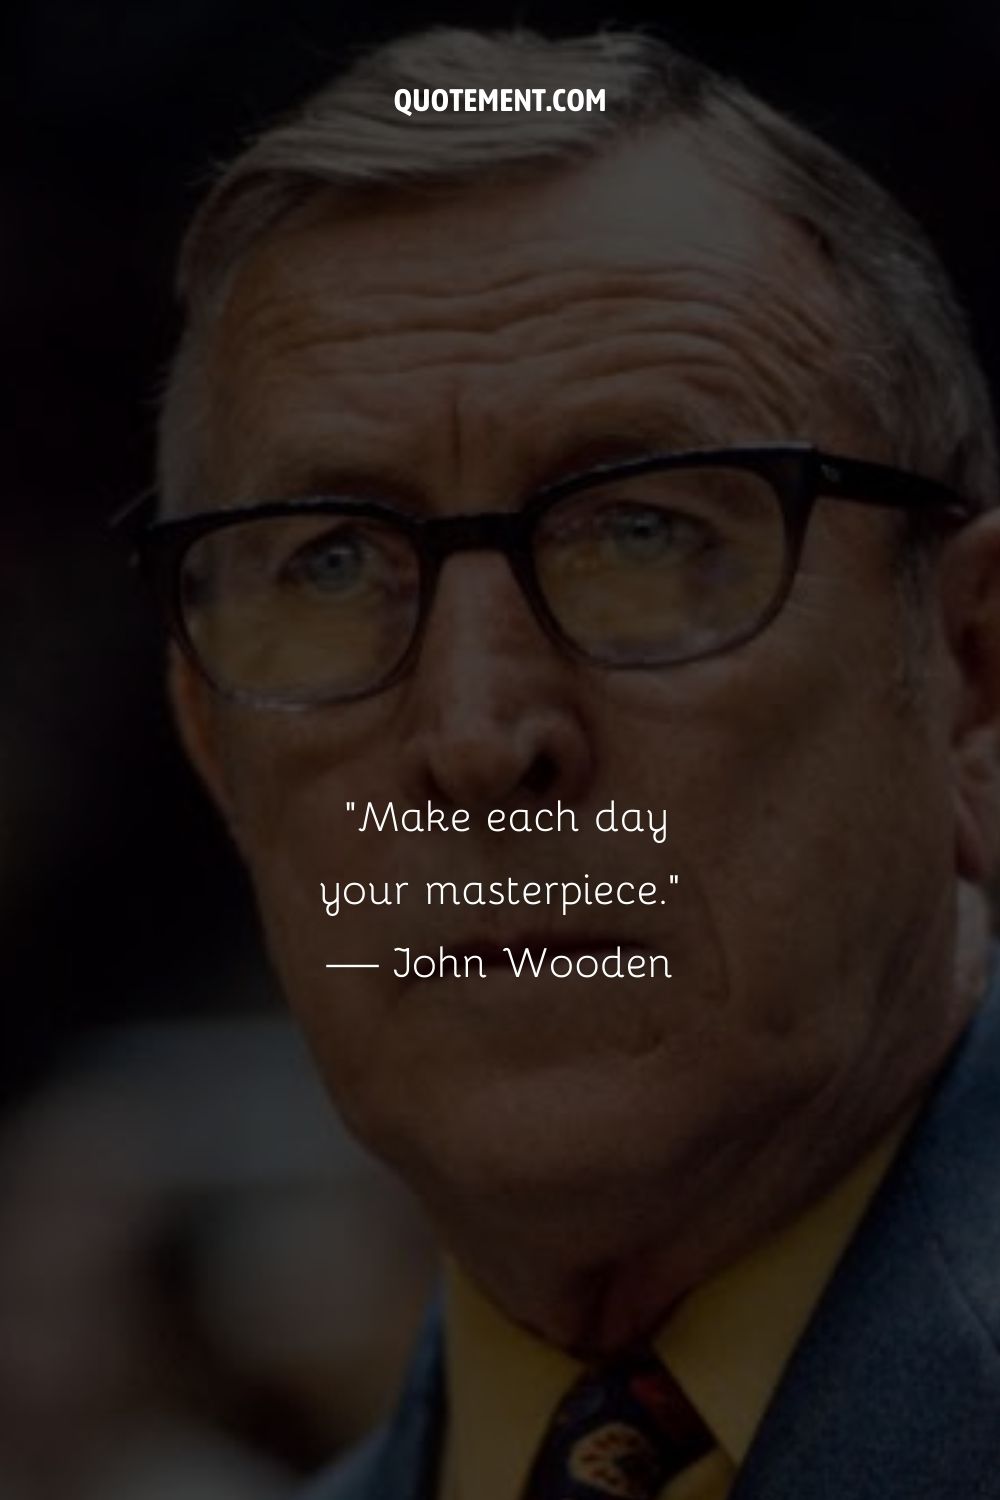 Inspirational John Wooden quote.